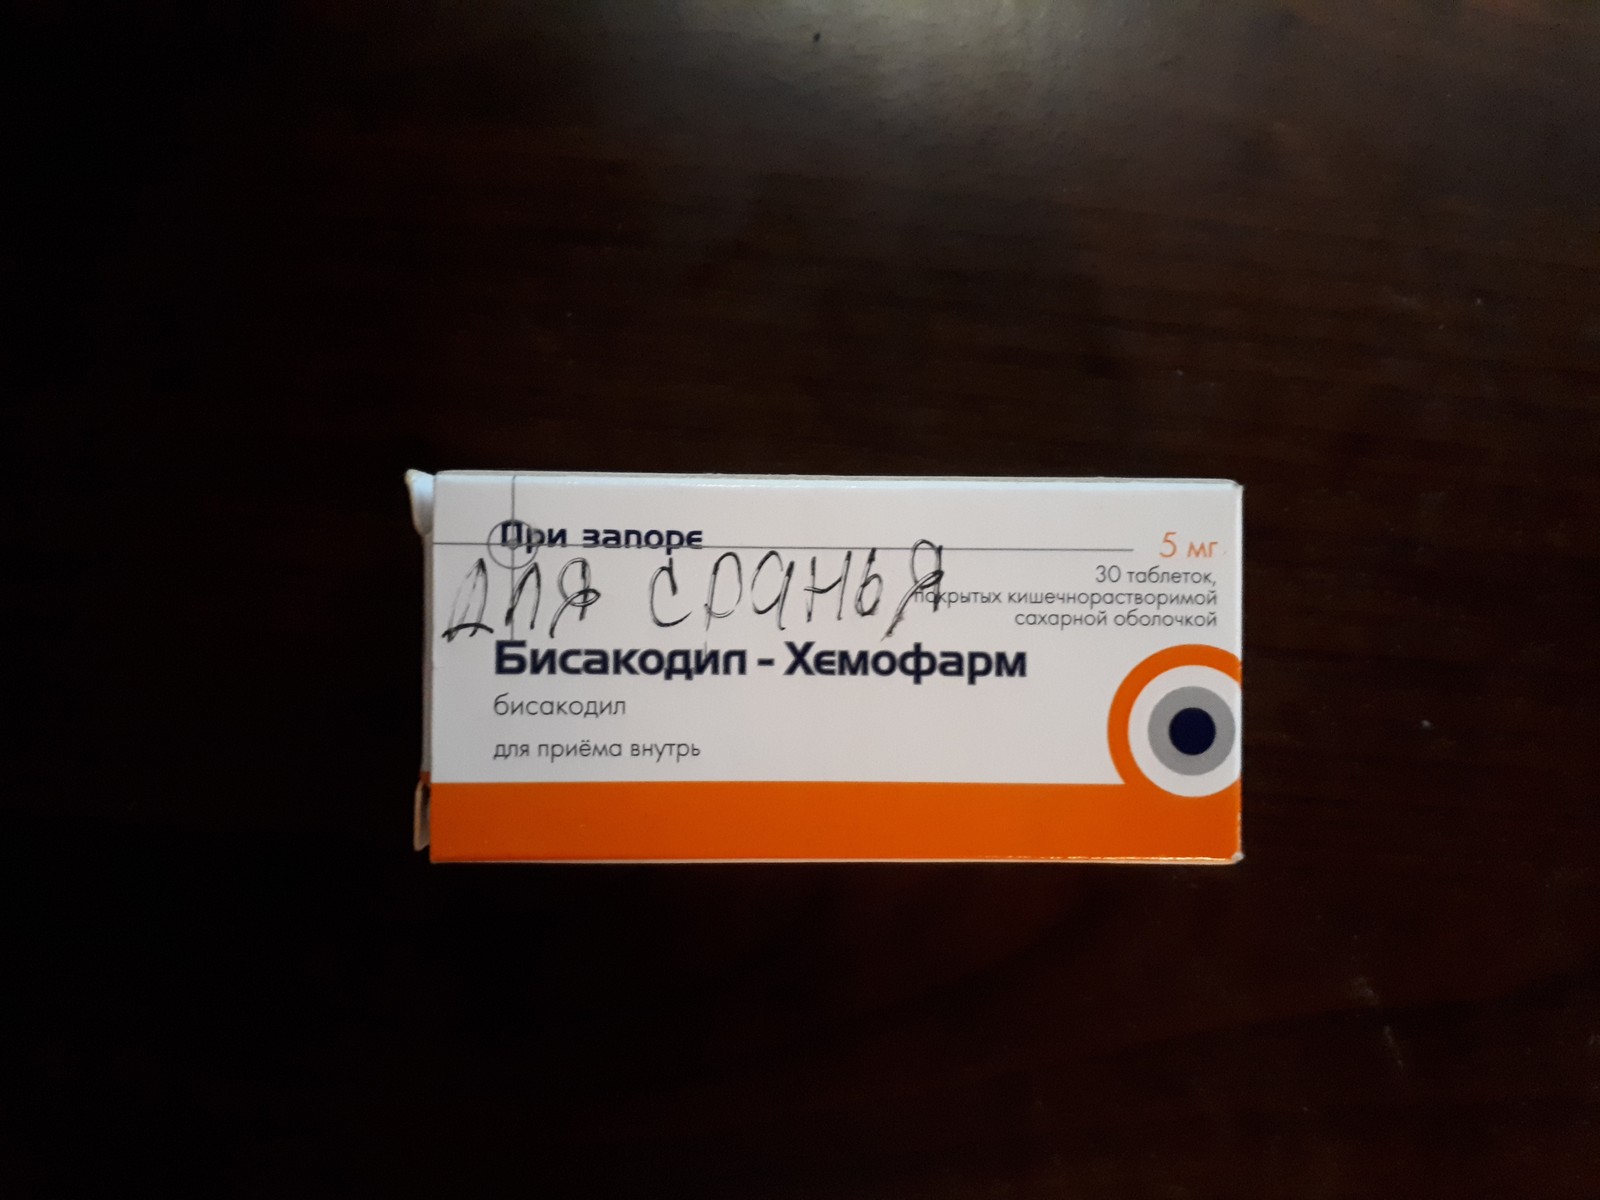 But it’s immediately clear what the pills are for ... - Medications, Inscription